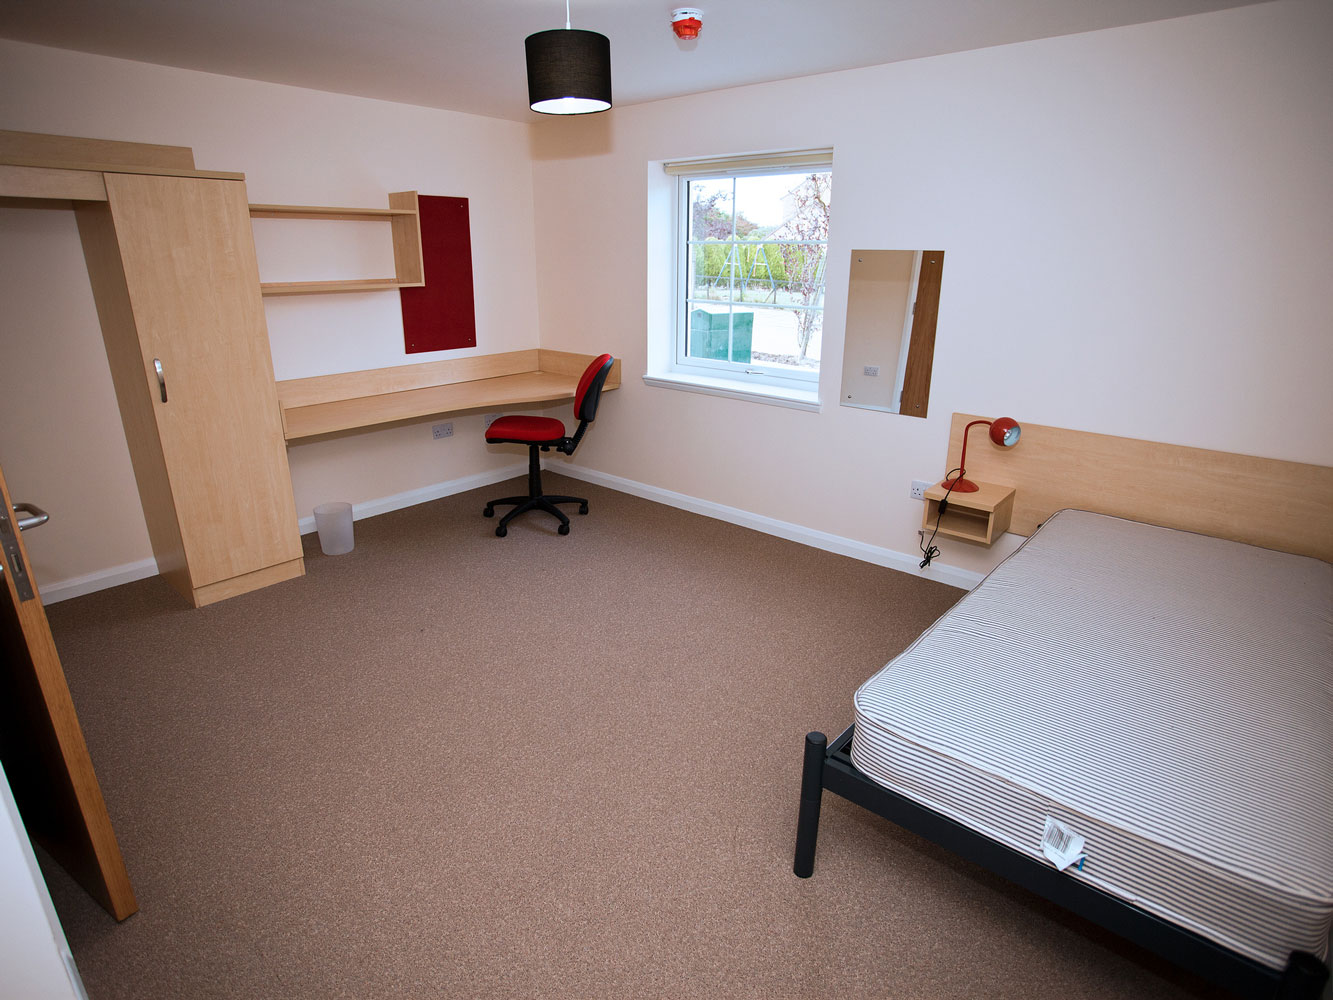 bedroom with double bed, desk and storage space